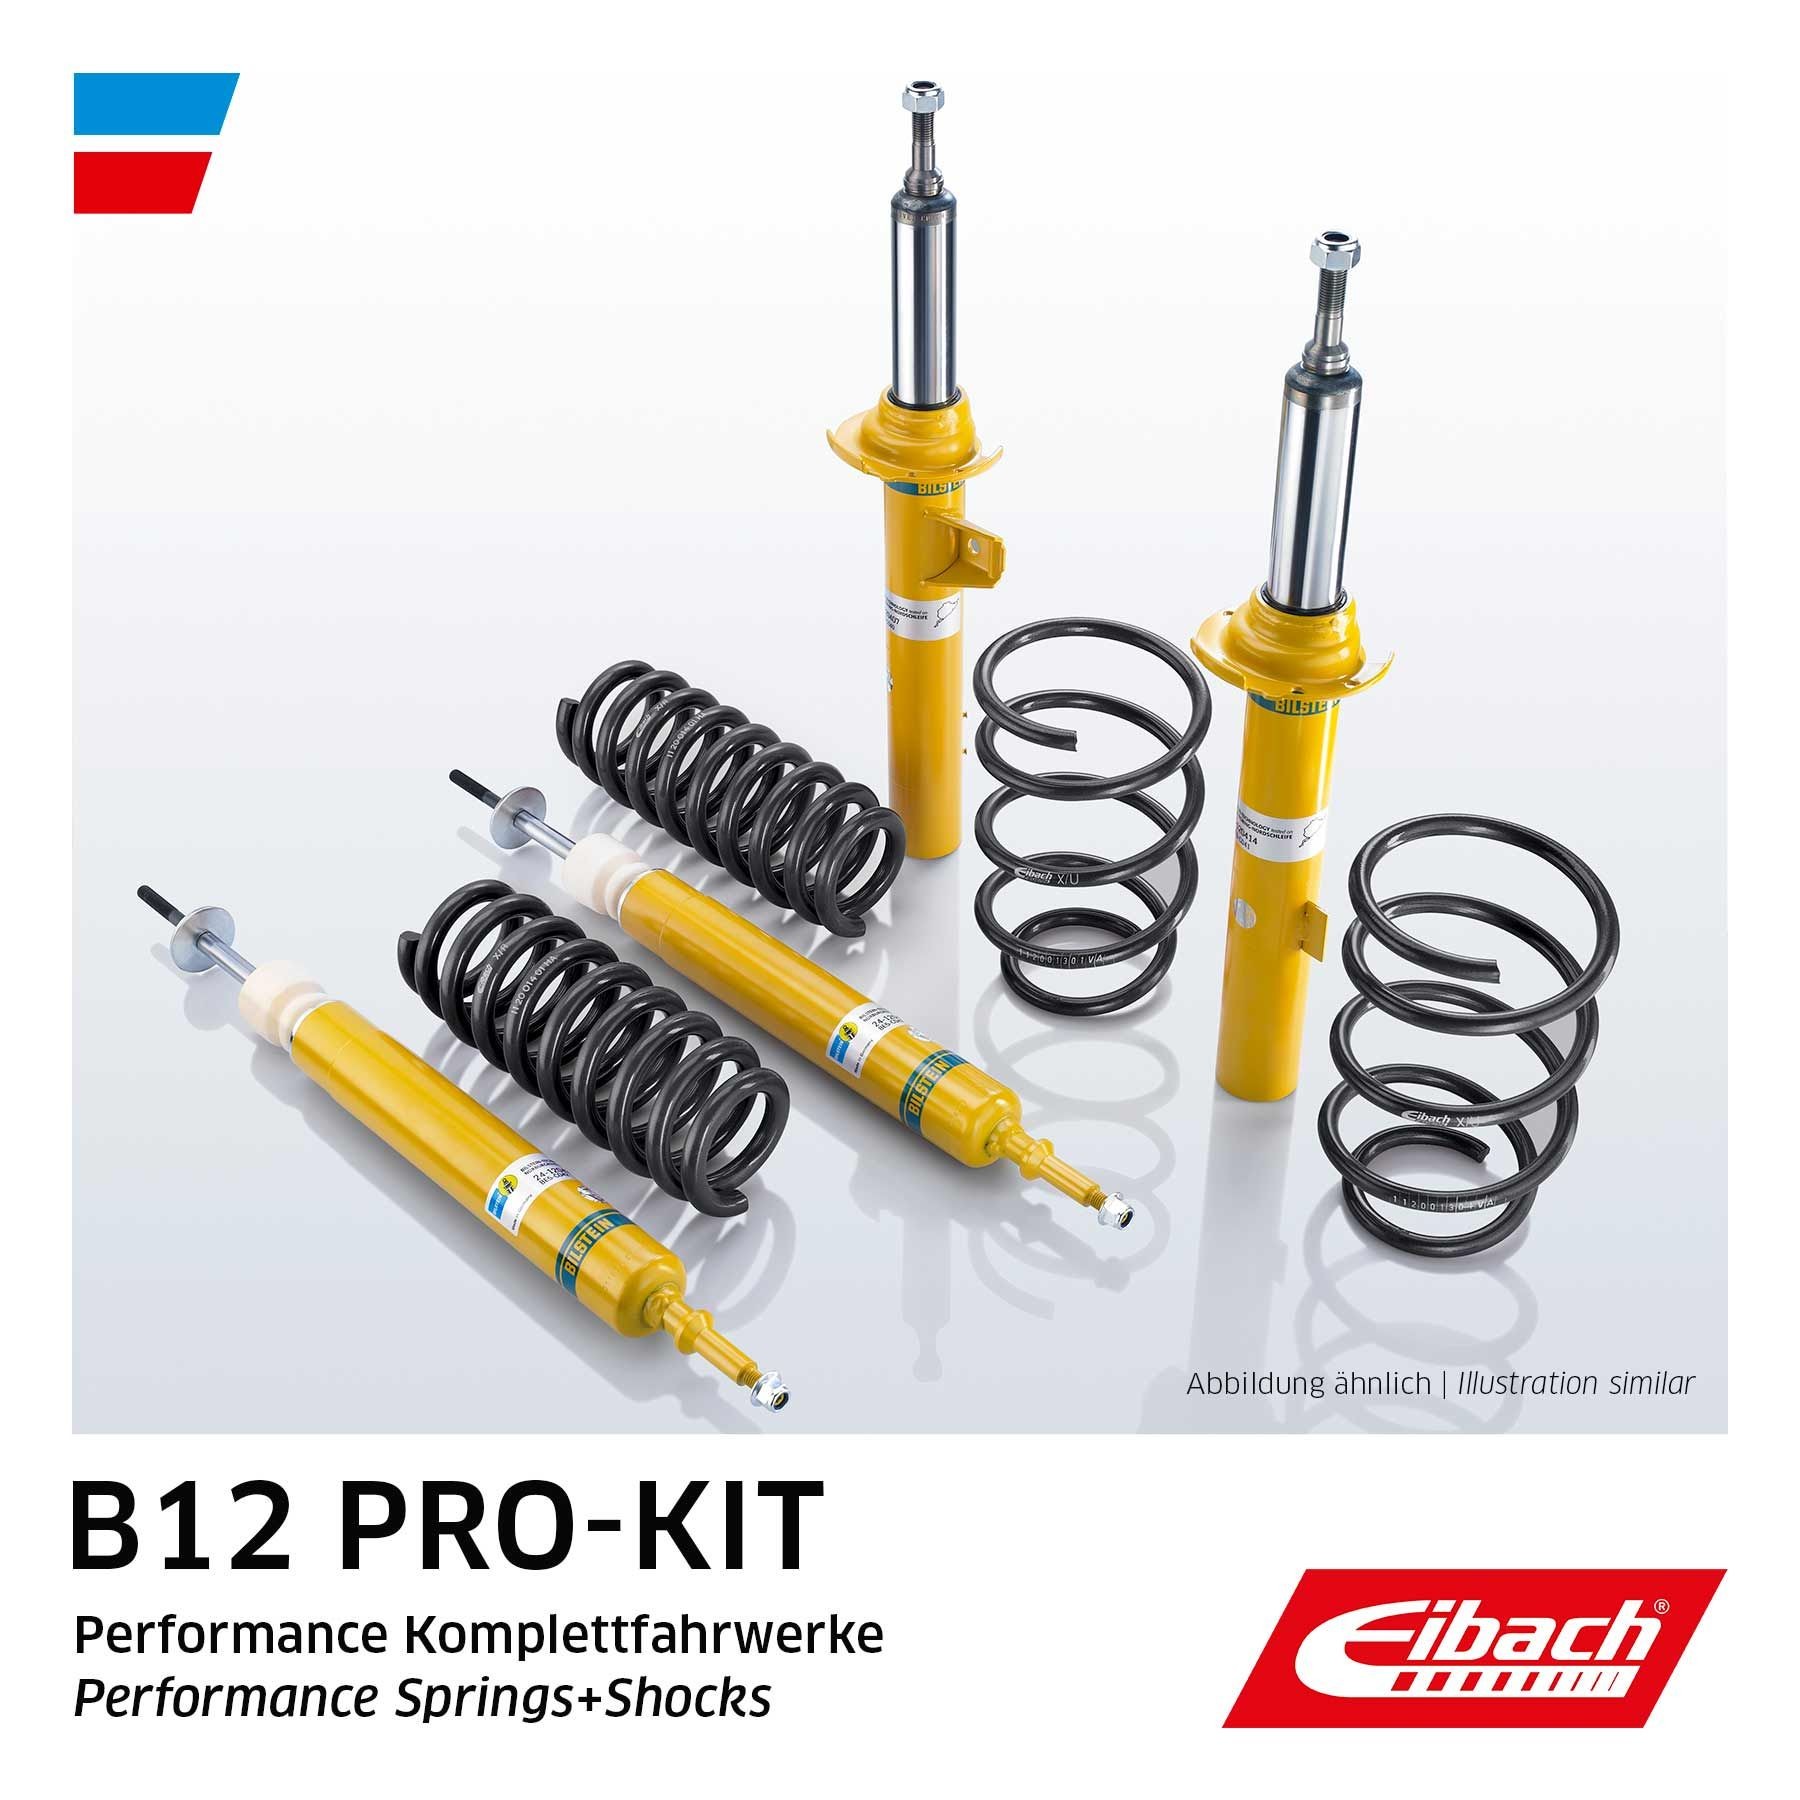 Volkswagen Suspension Kit, coil springs / shock absorbers EIBACH E90-85-001-06-22 at a good price